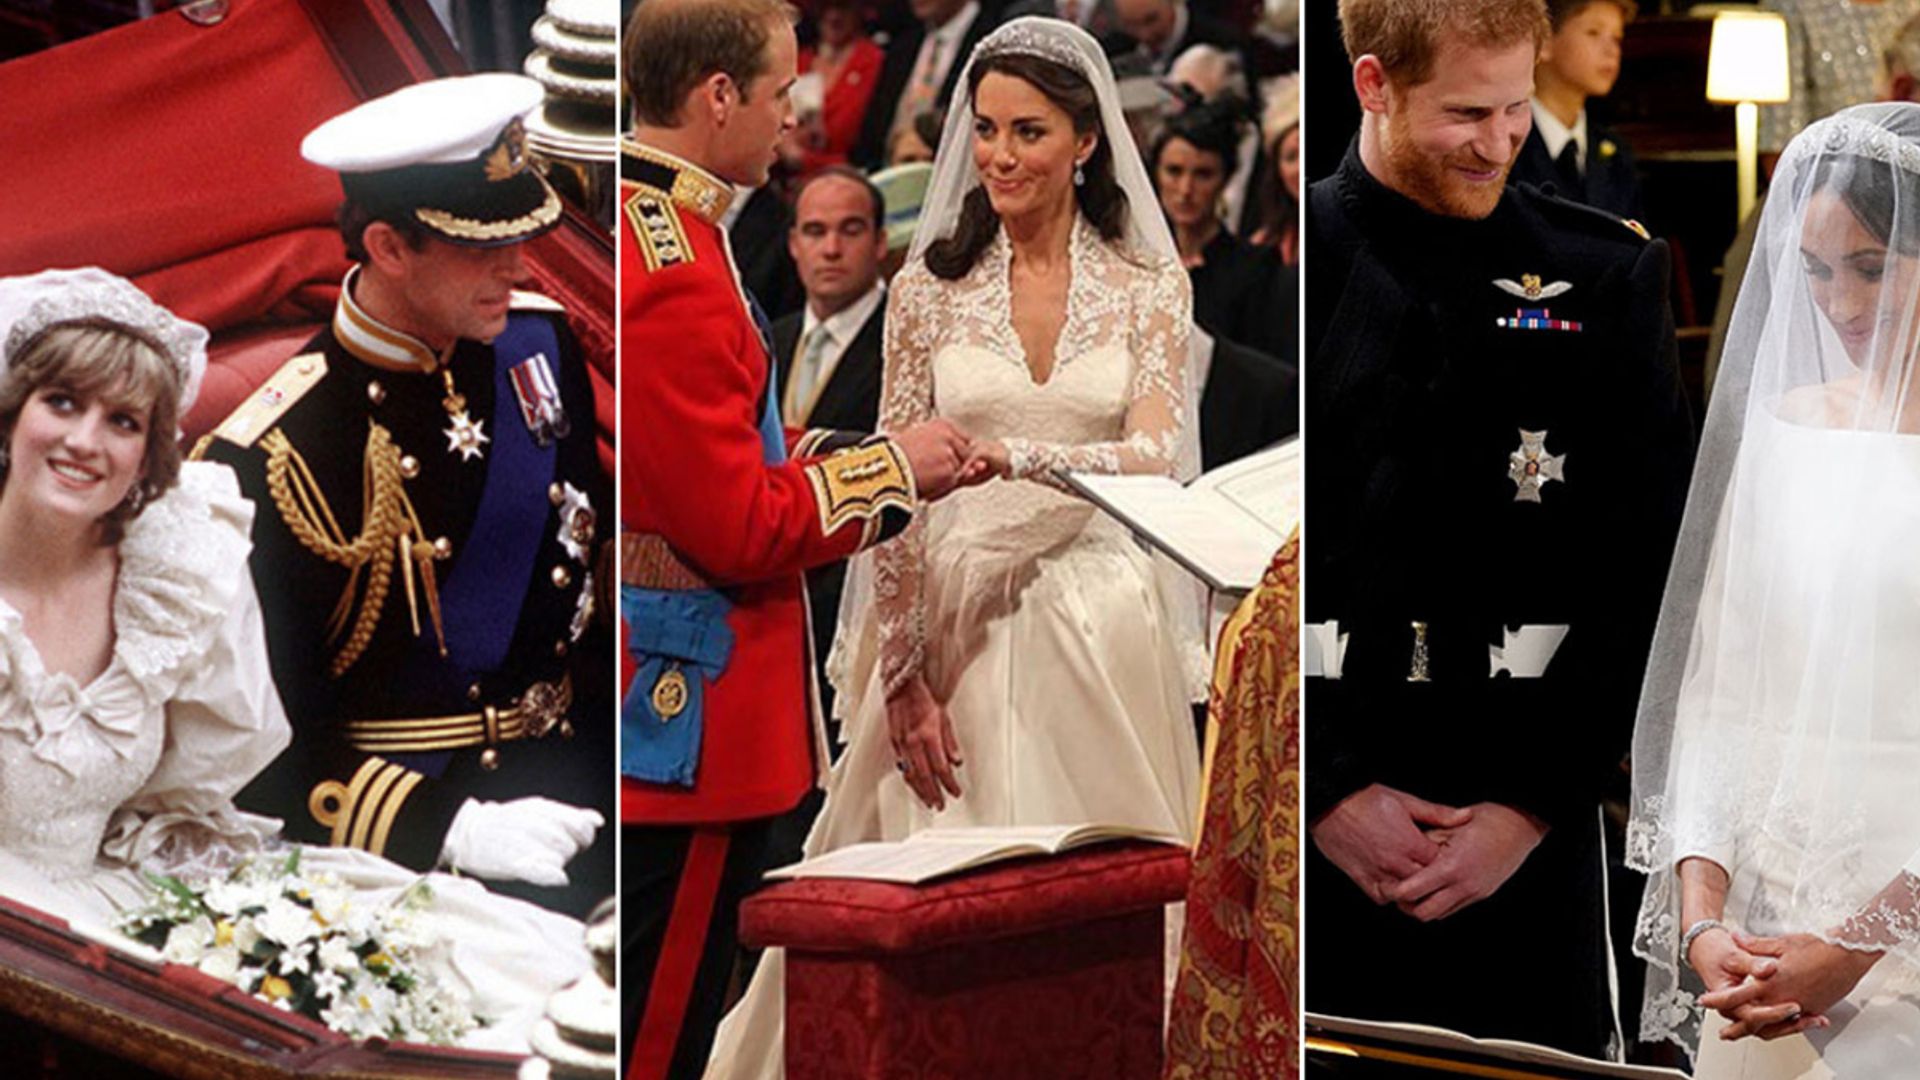 The most watched royal wedding has changed - who takes the top spot?